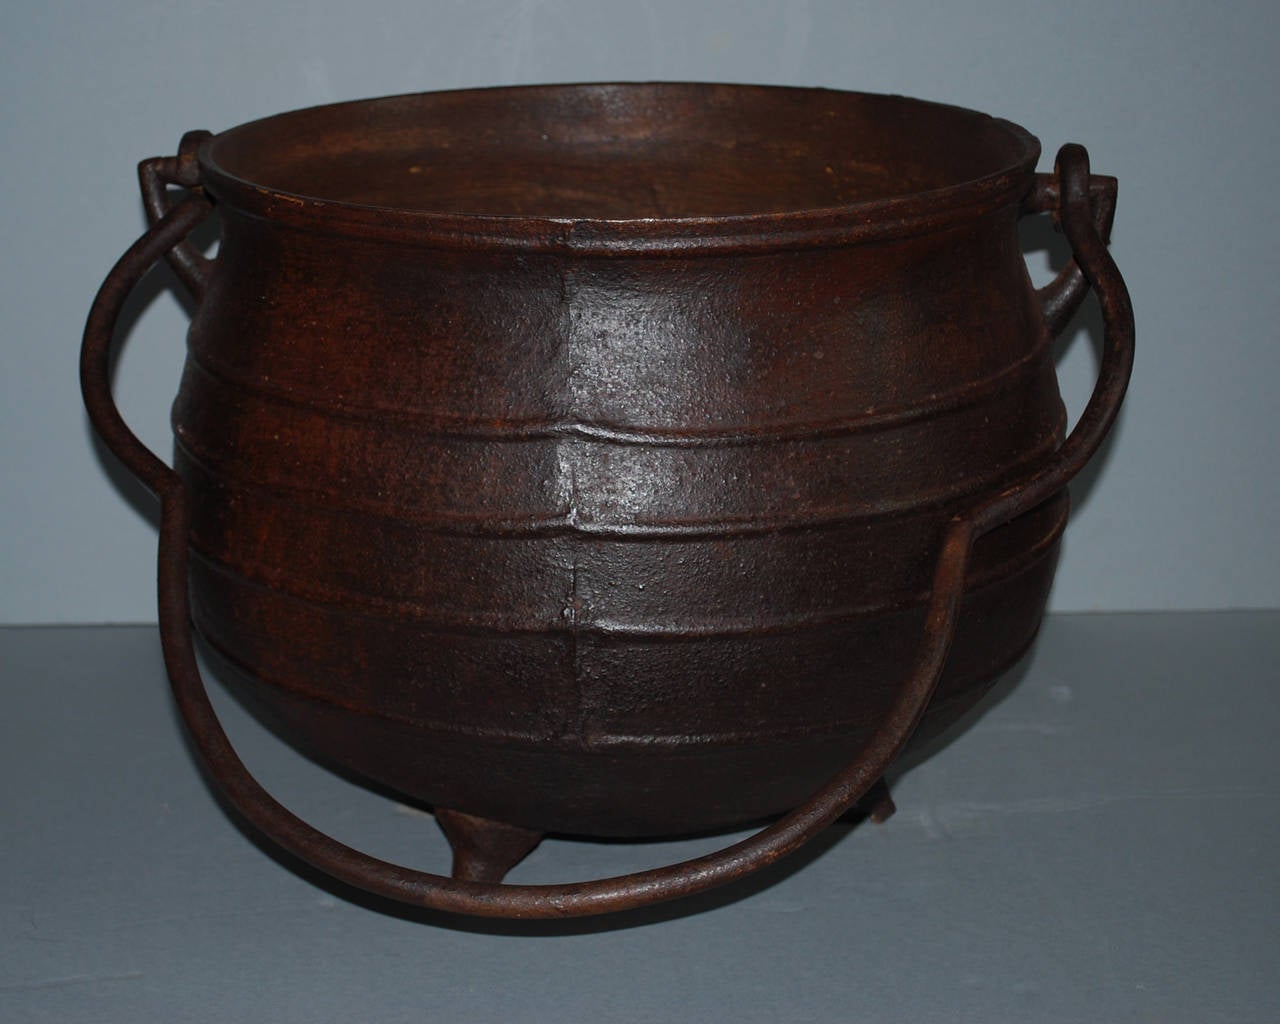 Early 19th century cast iron pot or kettle used for cooking made from one piece.
Originates Germany, dating circa 1800.
(Shipping complimentary).